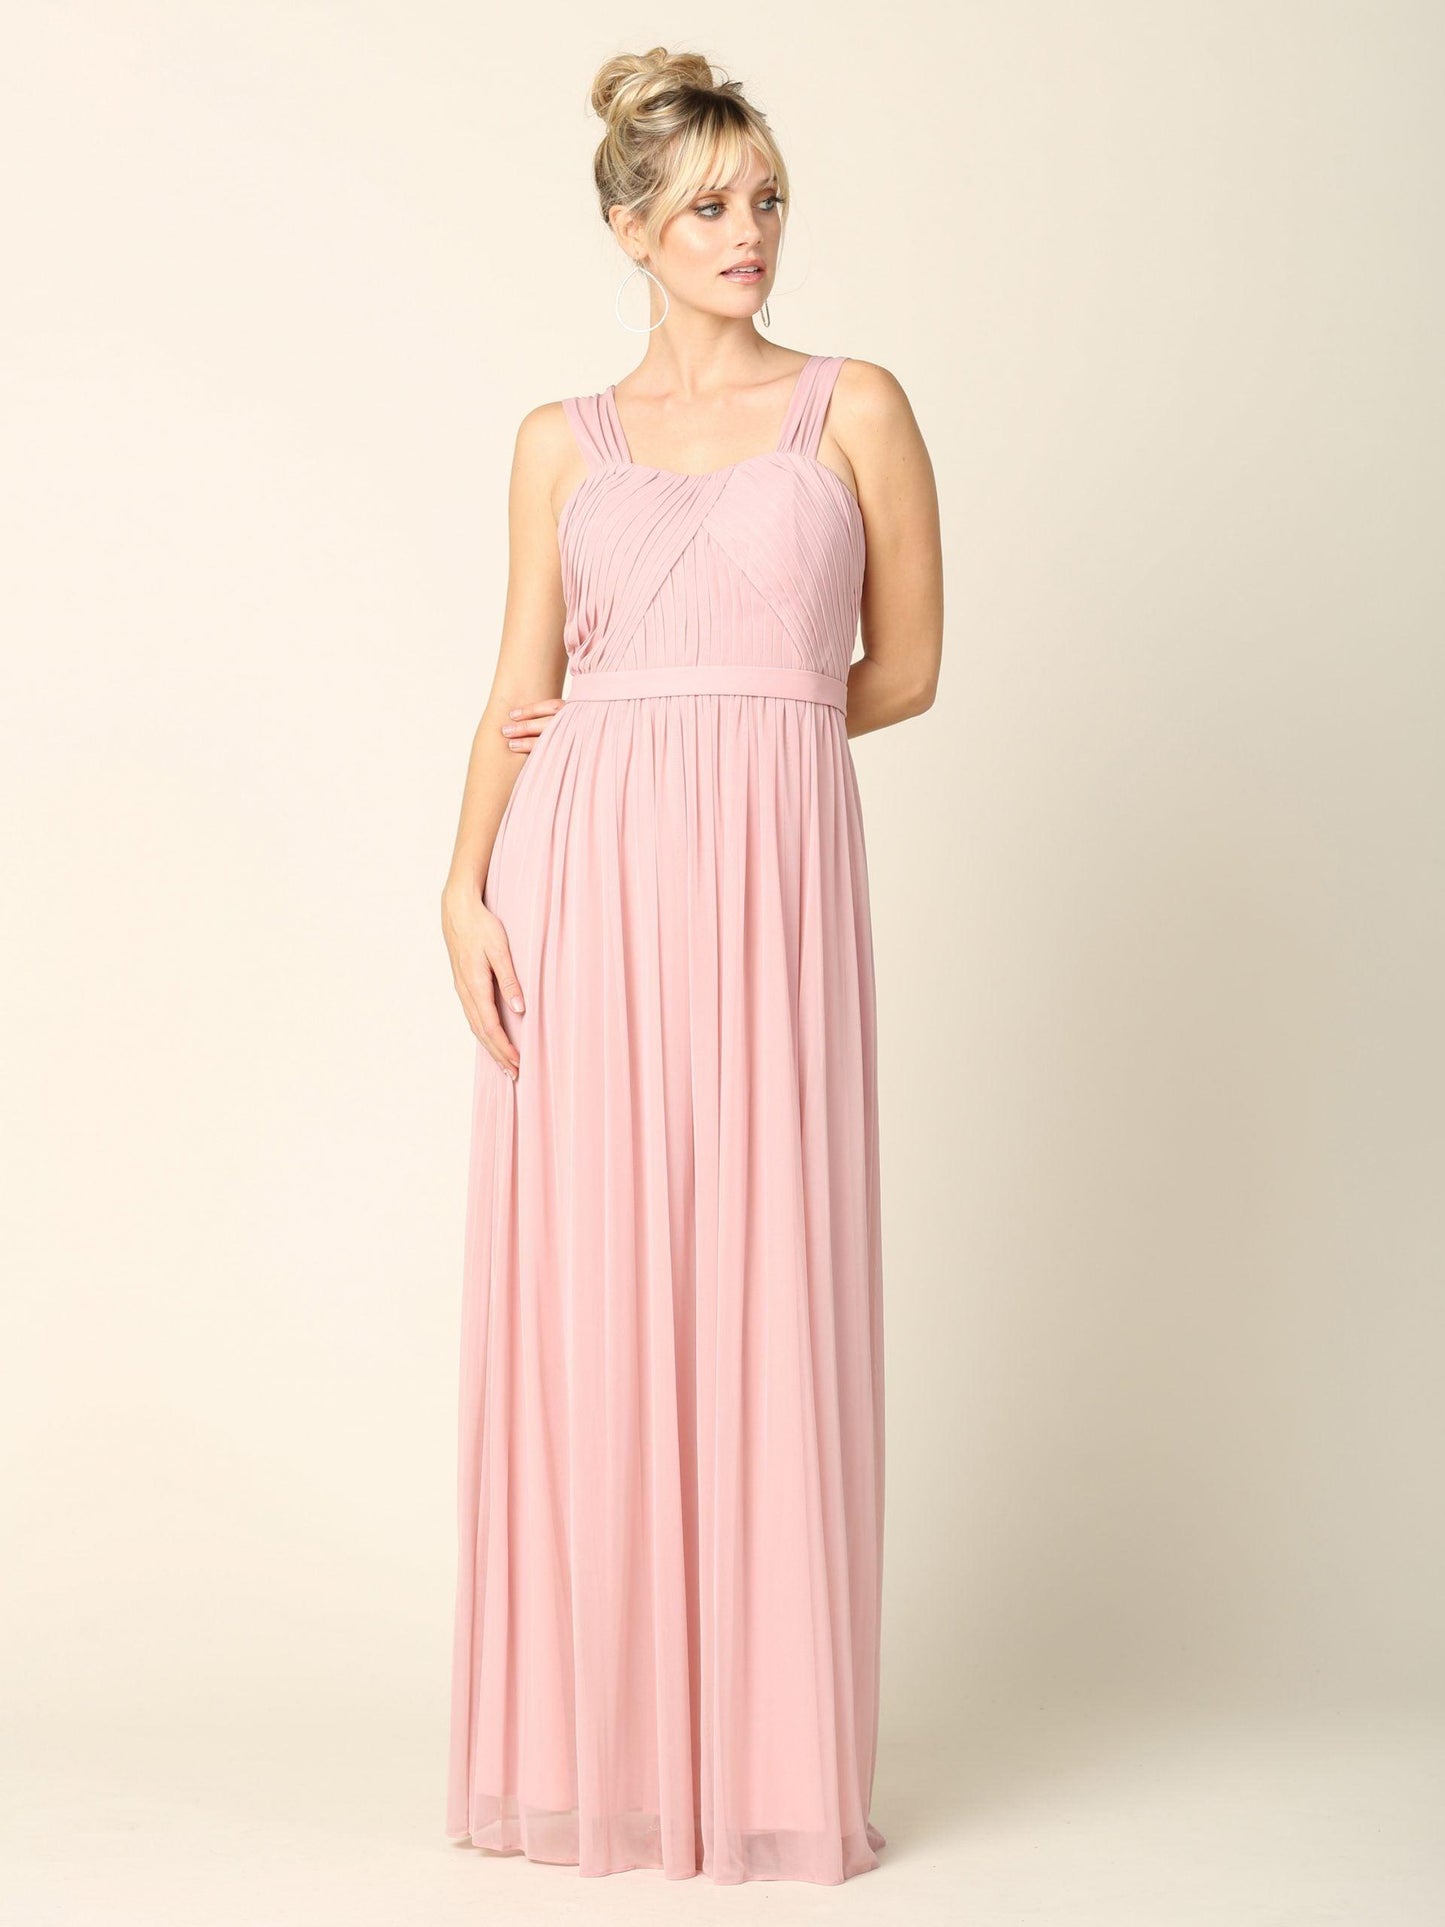 Sleeveless Long Bridesmaids Pleated Dress - The Dress Outlet